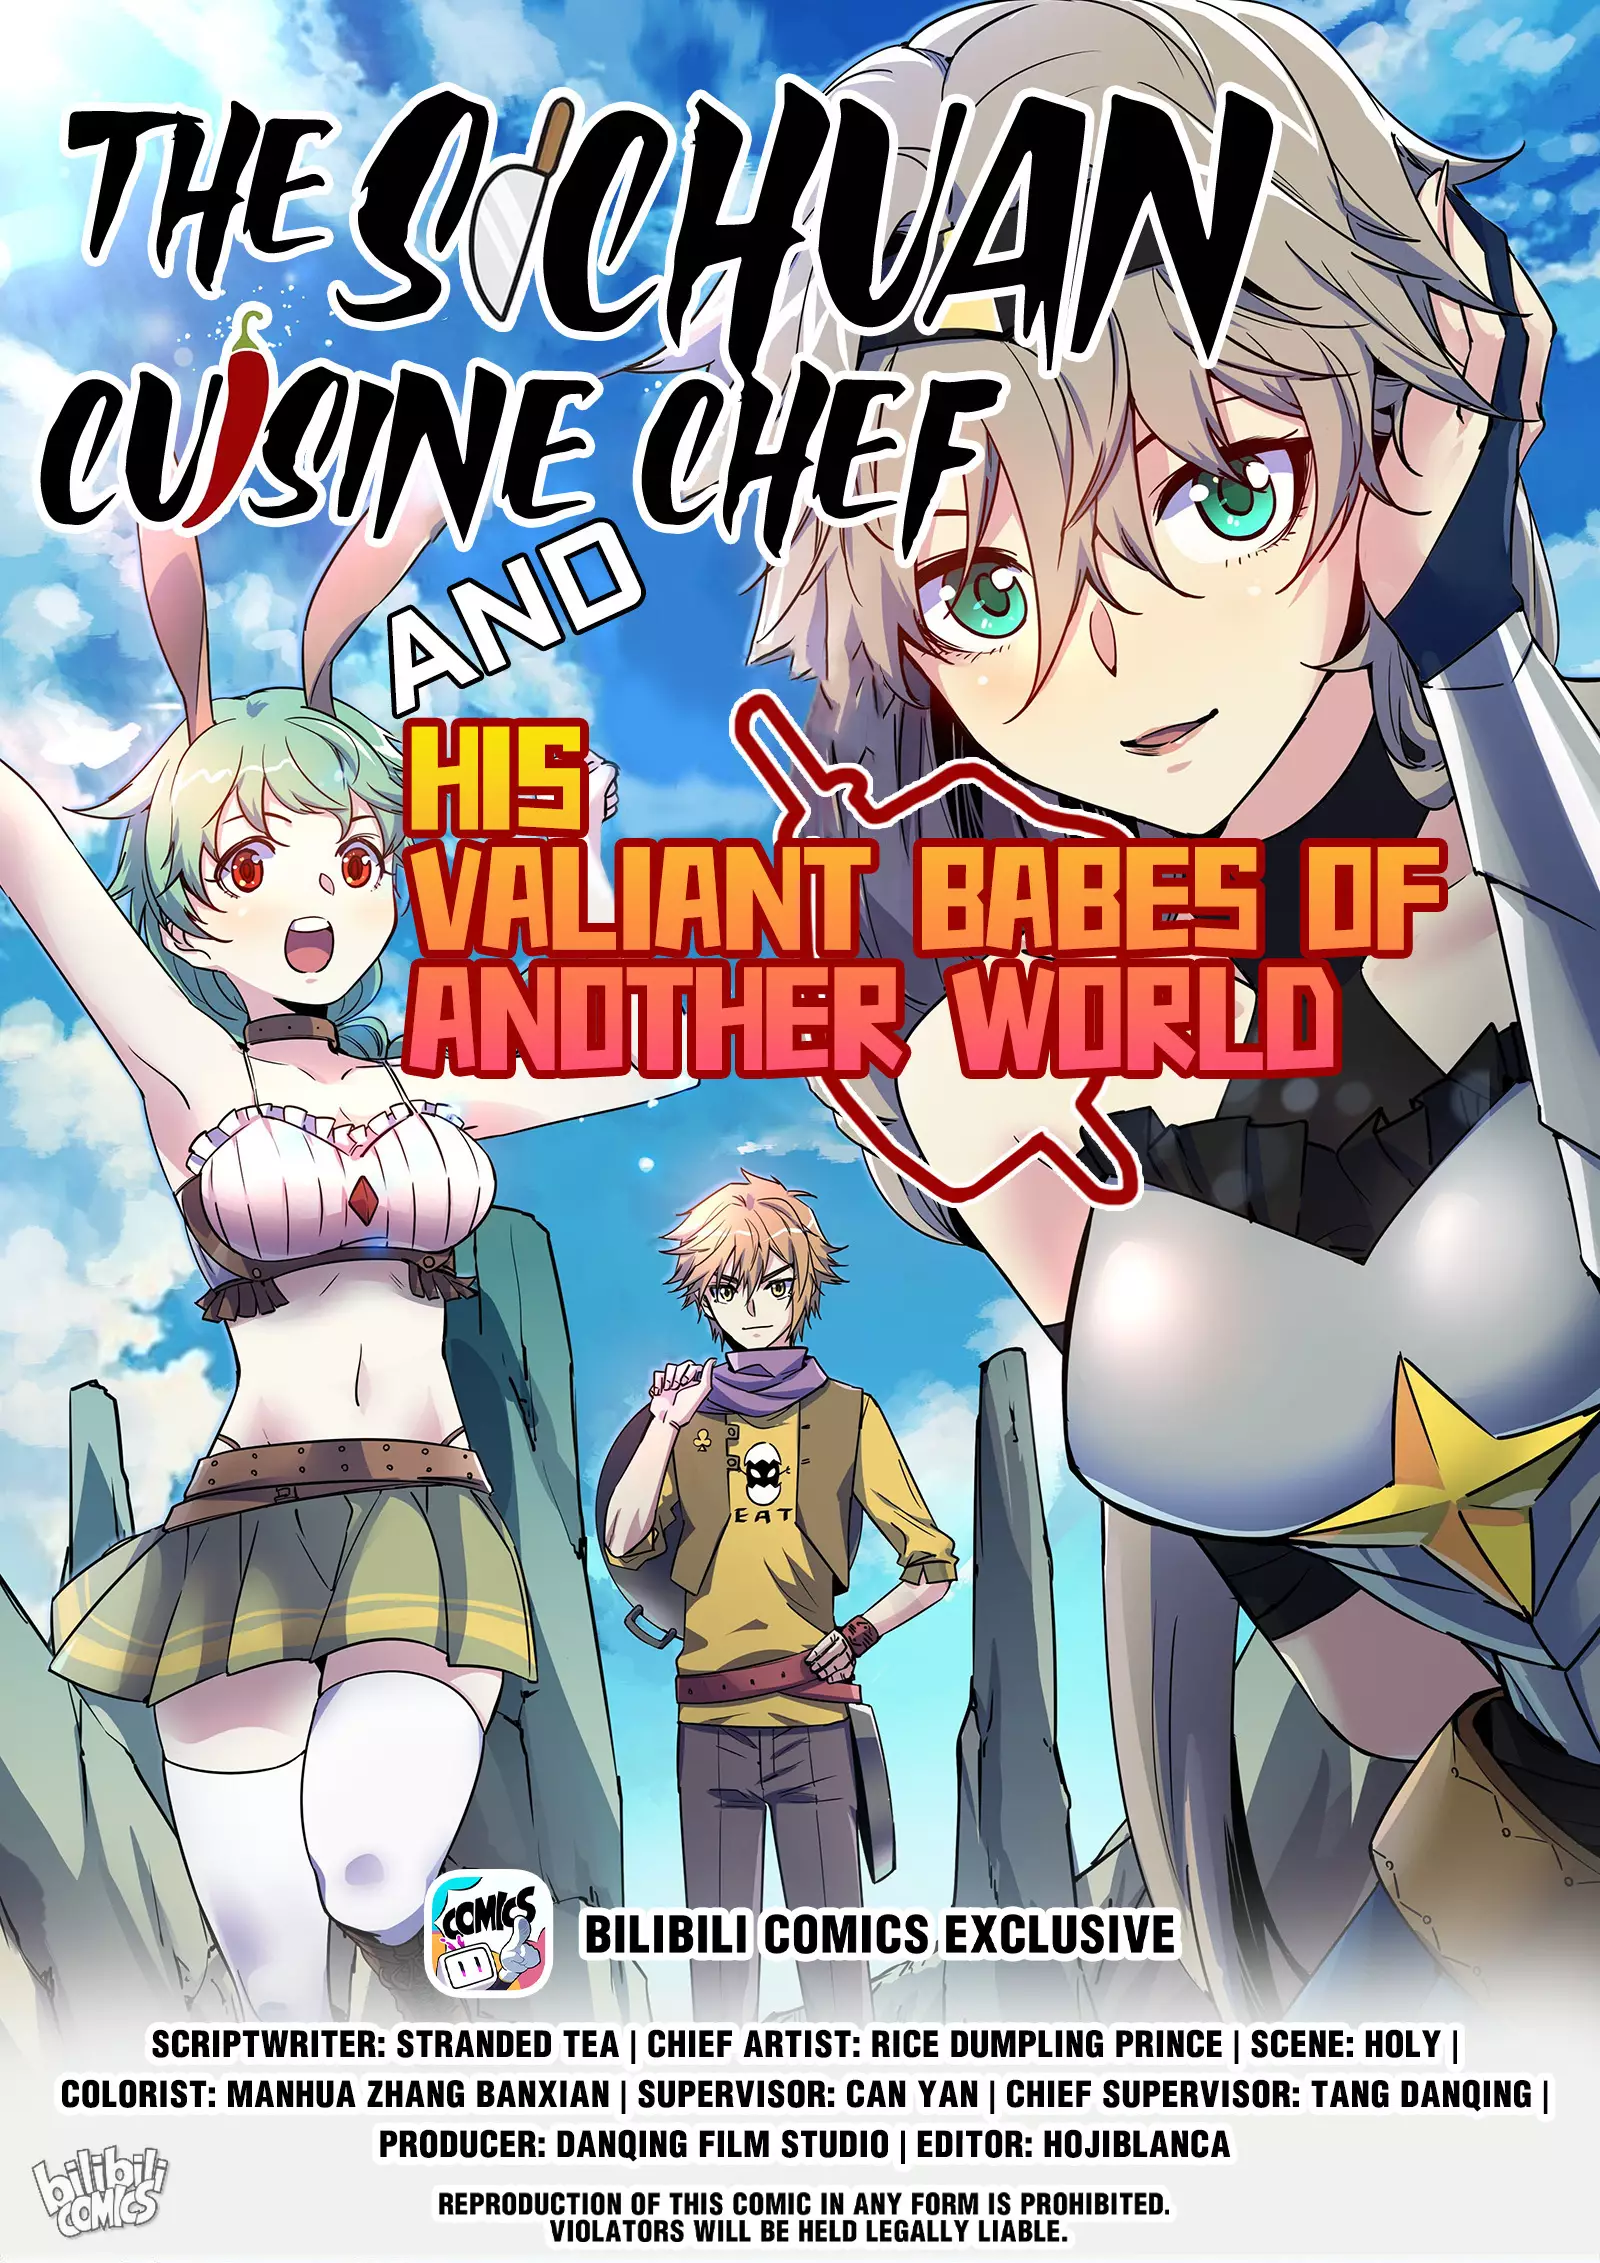 The Sichuan Cuisine Chef And His Valiant Babes Of Another World - 31 page 1-1b7d2721